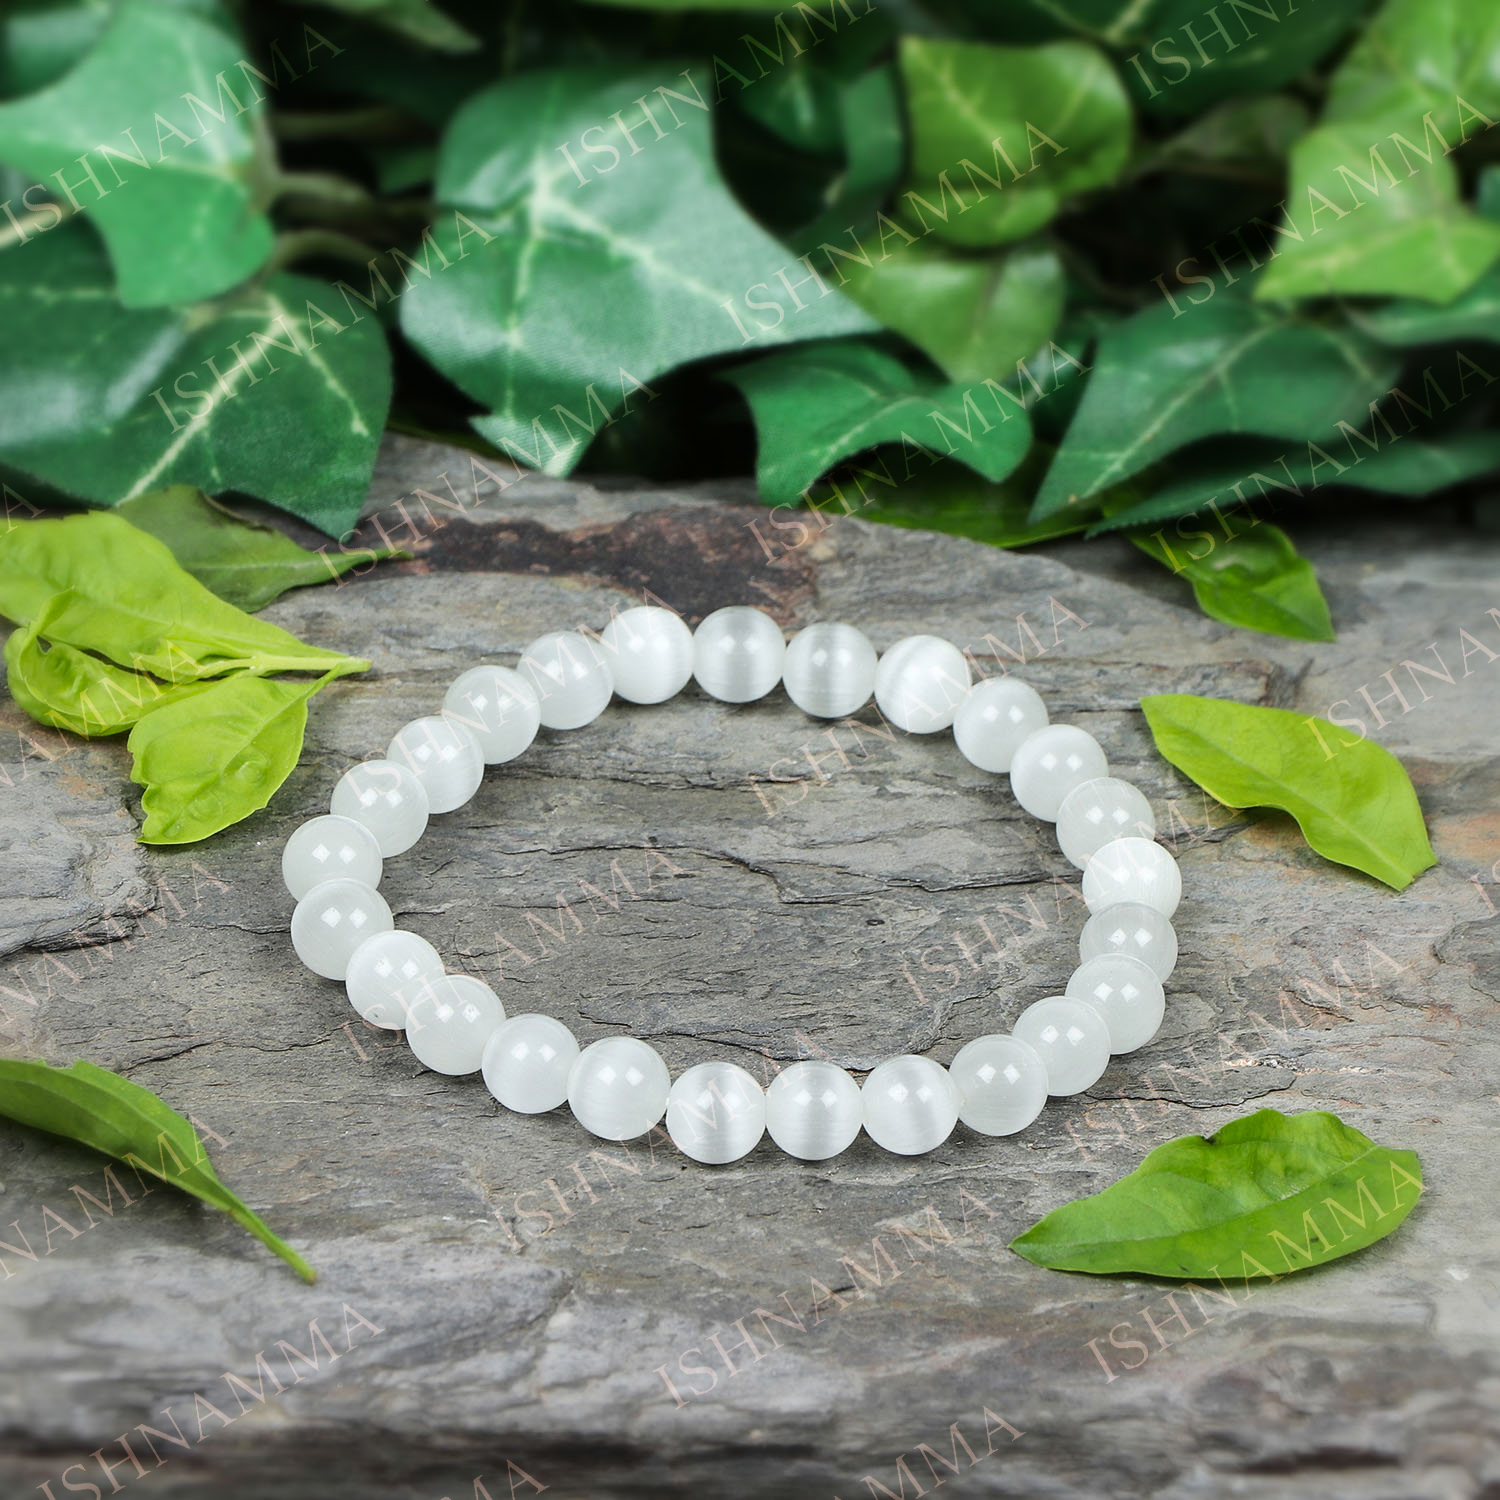 Buy ALPHA ASTRO EXPORTS Selenite Crystal Bracelet 10mm for Men & Women is a  Master Cleanser Cleans Blockages Negative Energy of Body Home & Crystals at  Amazon.in